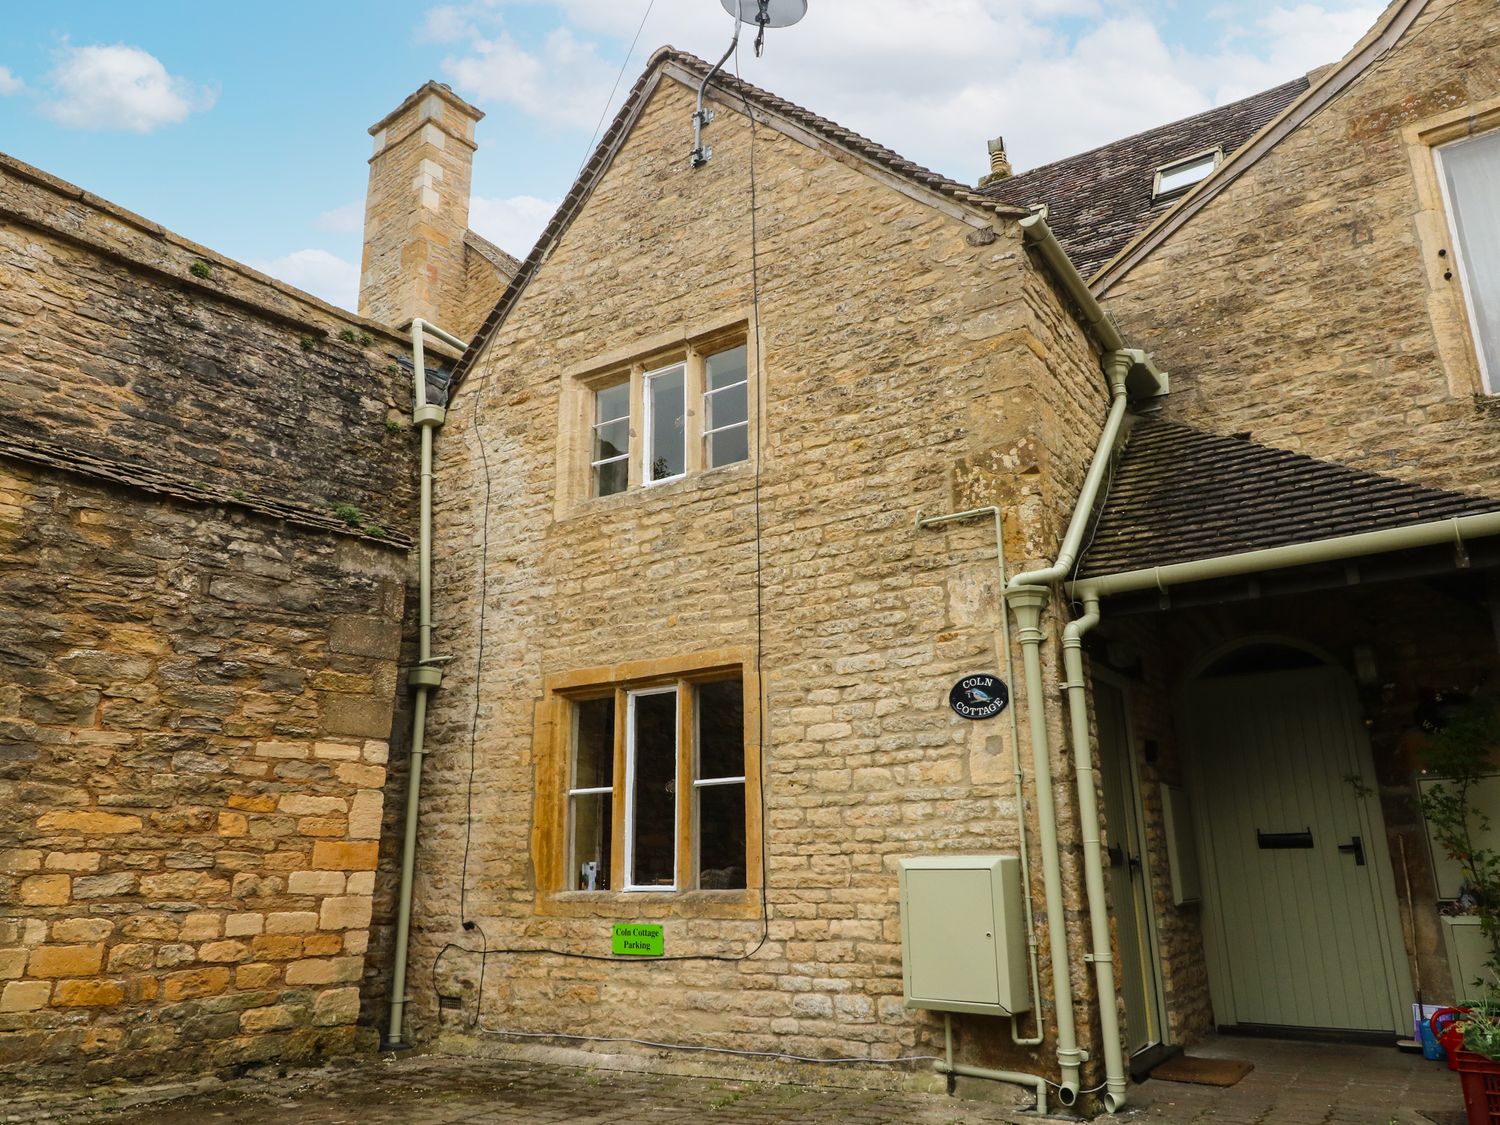 Coln Cottage - Cotswolds - 1079447 - photo 1